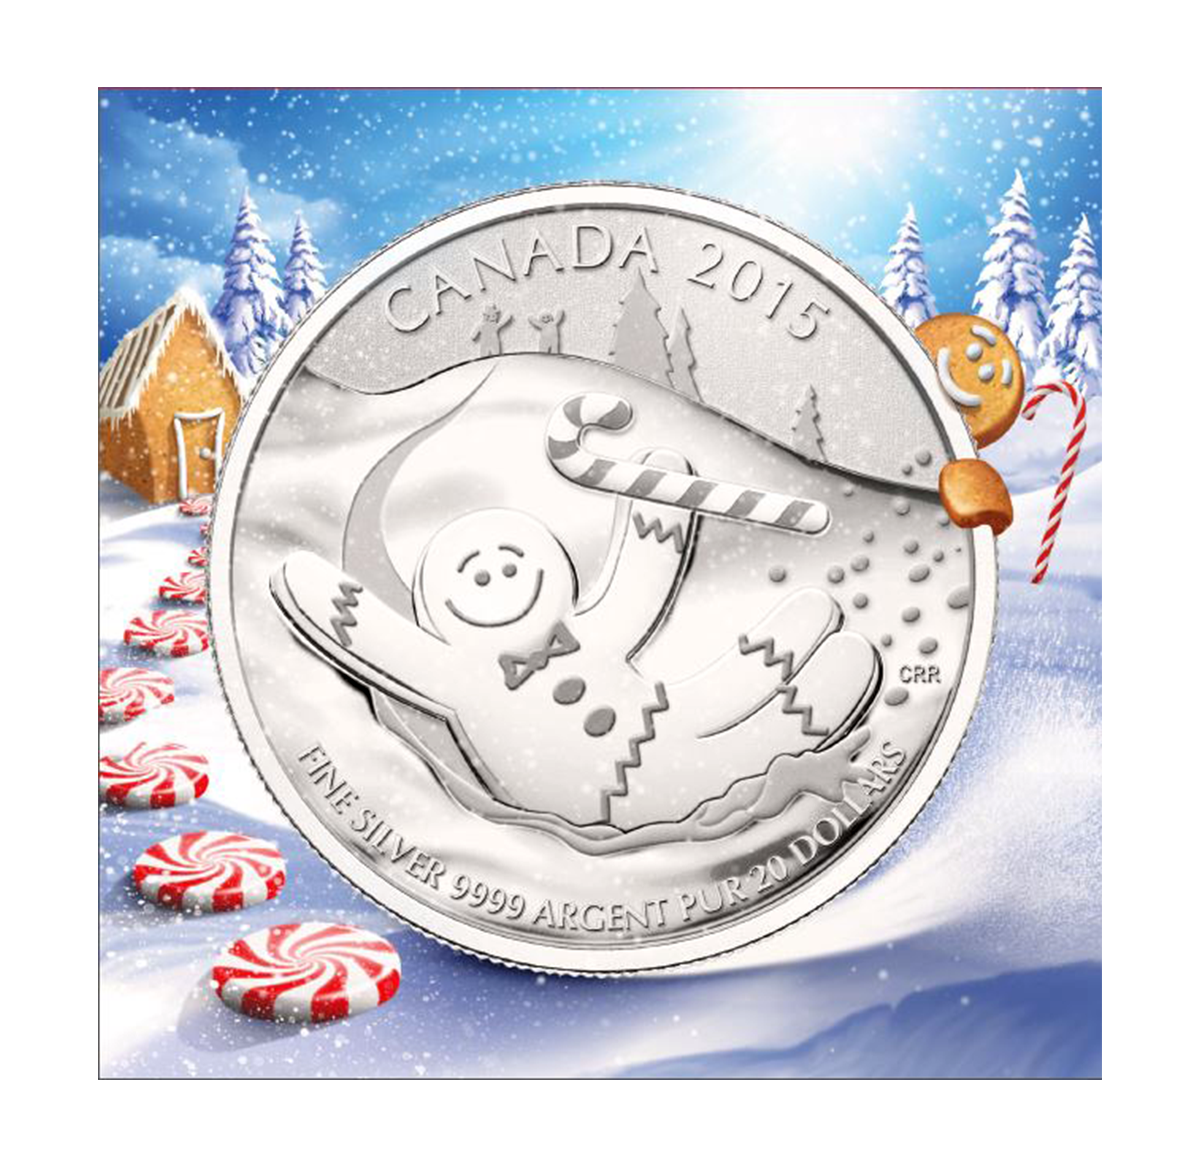 2015 CANADA $20 FINE SILVER GINGERBREAD MAN COMMEMORATIVE COIN IN PACKAGE!!!! 